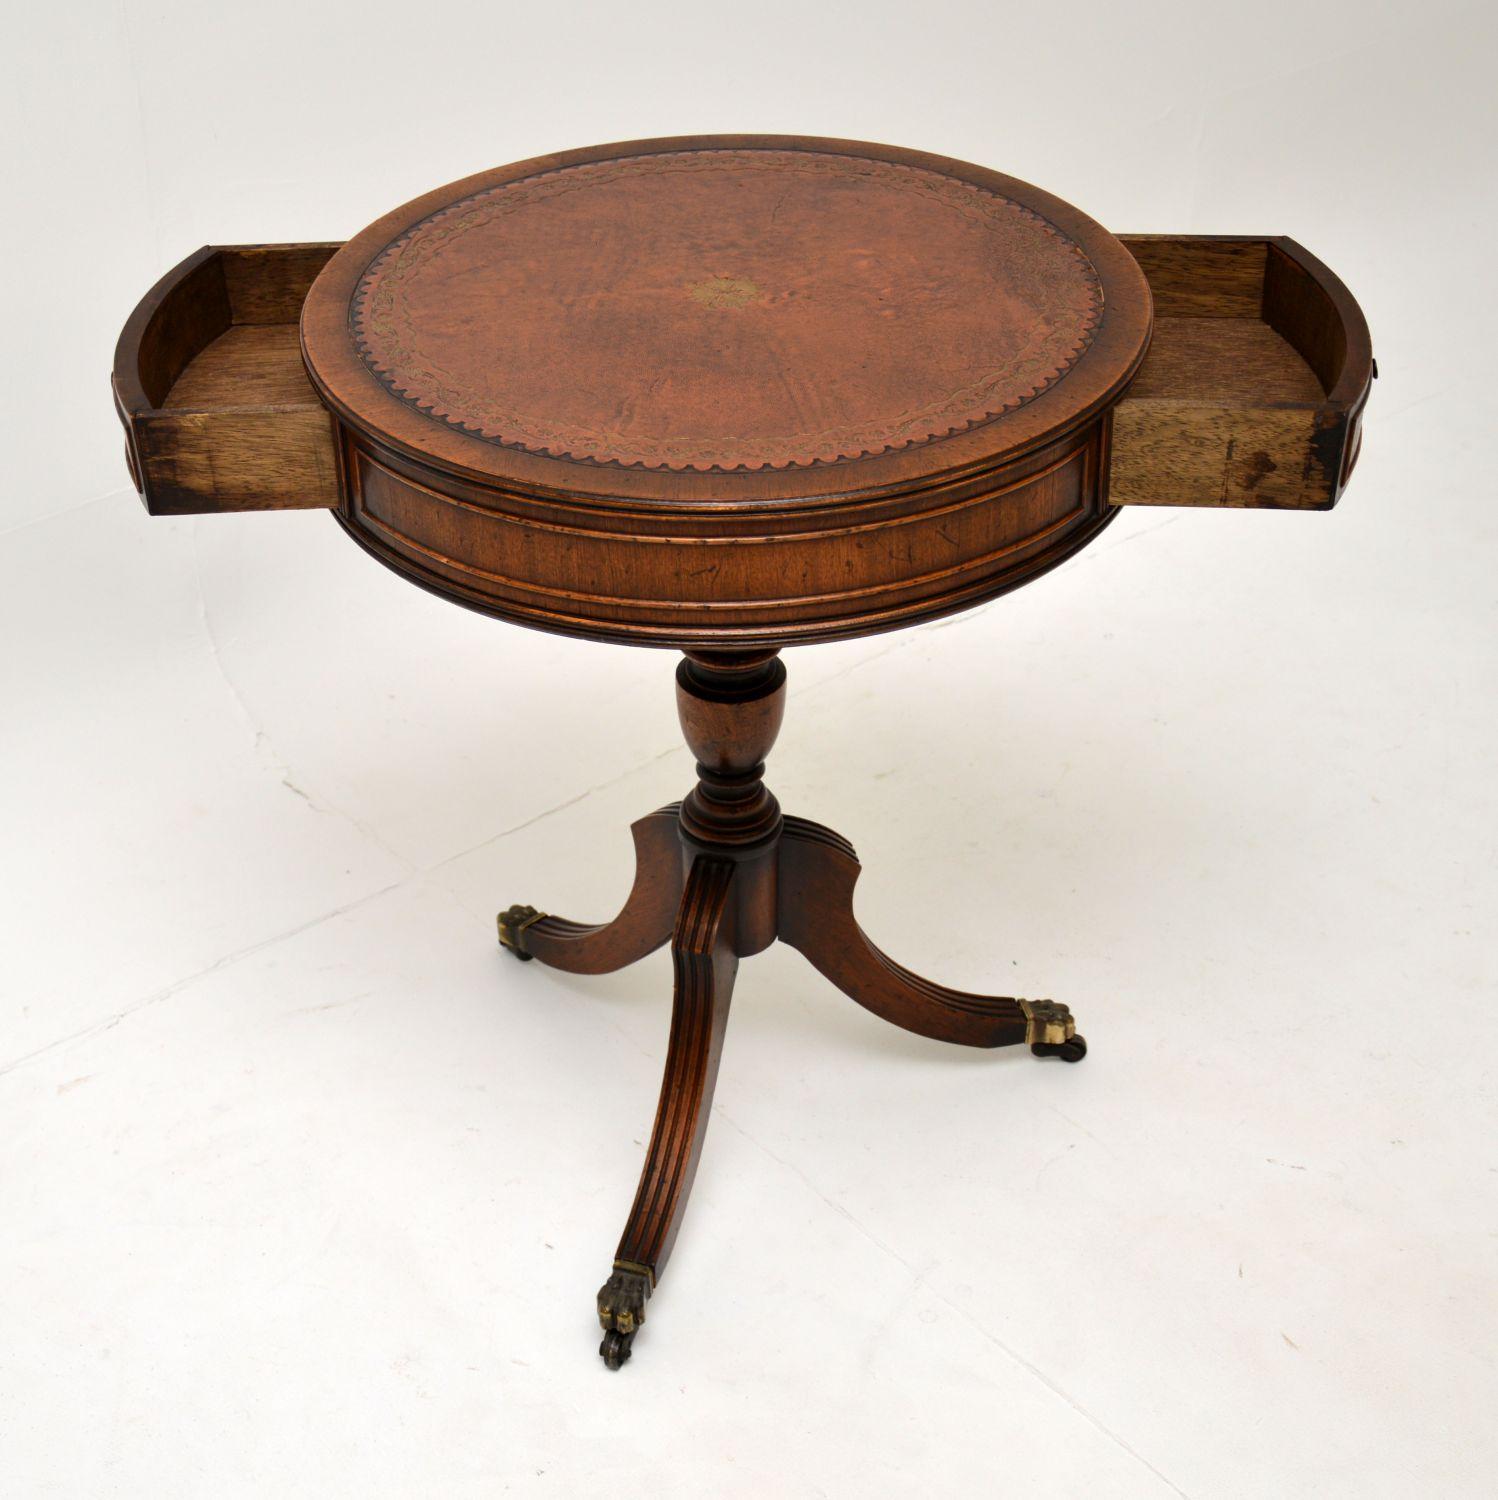 20th Century Antique Regency Style Leather Top Drum Table